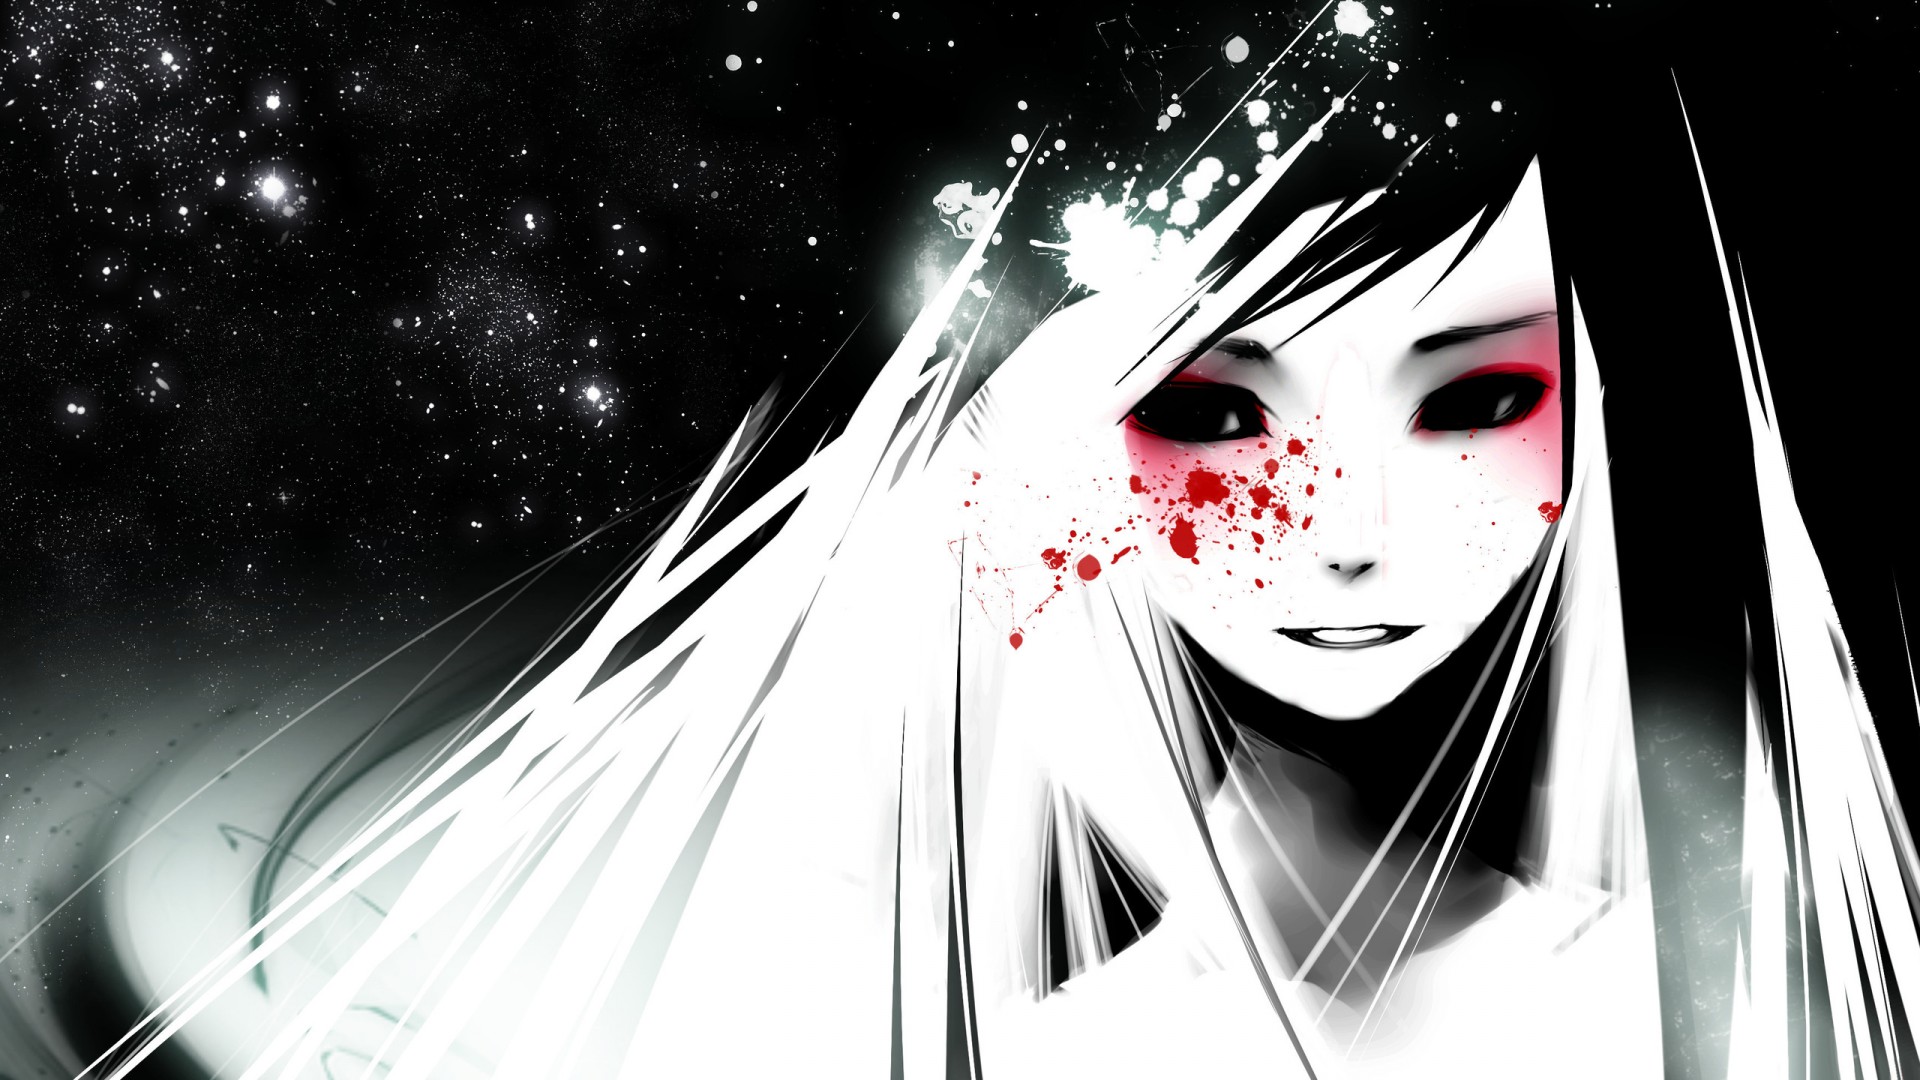 30 Wallpaper Anime horror movies DOWNLOAD FREE 13317